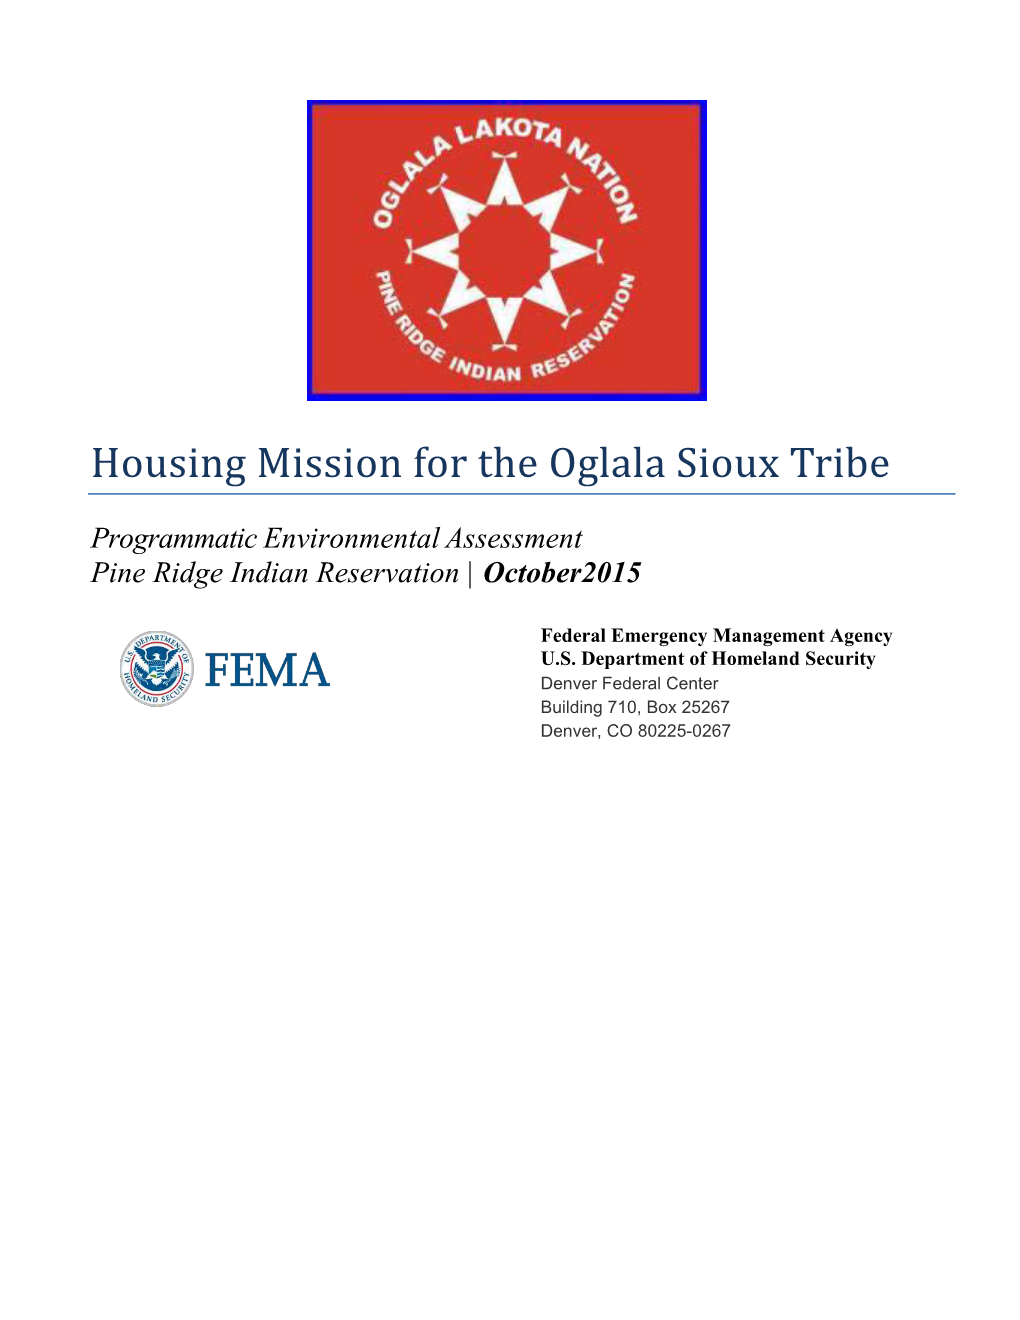 Housing Mission for the Oglala Sioux Tribe